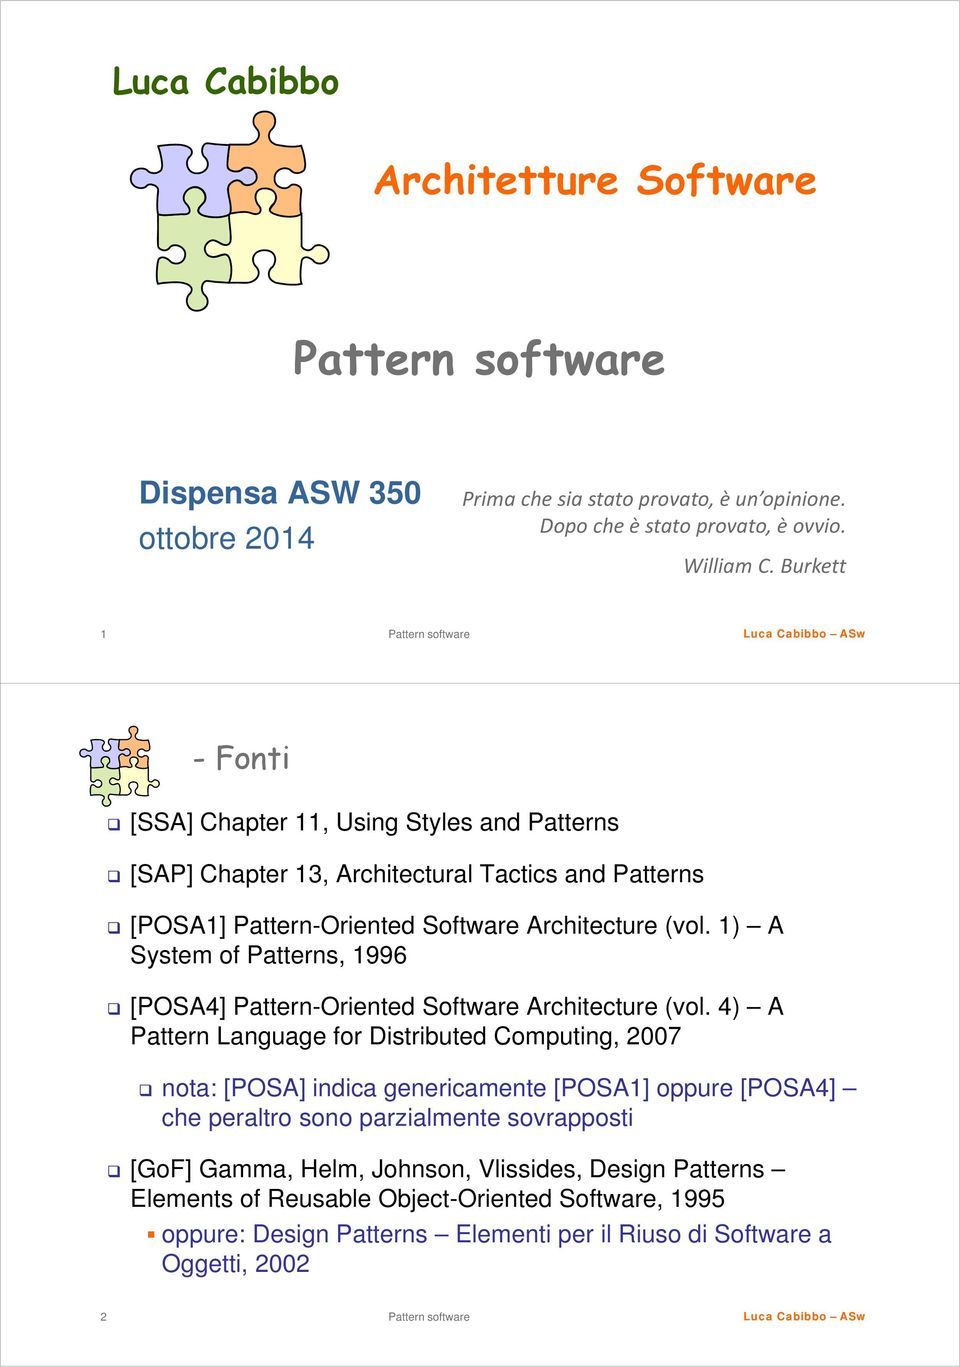 1) A System of Patterns, 1996 [POSA4] Pattern-Oriented Software Architecture (vol.